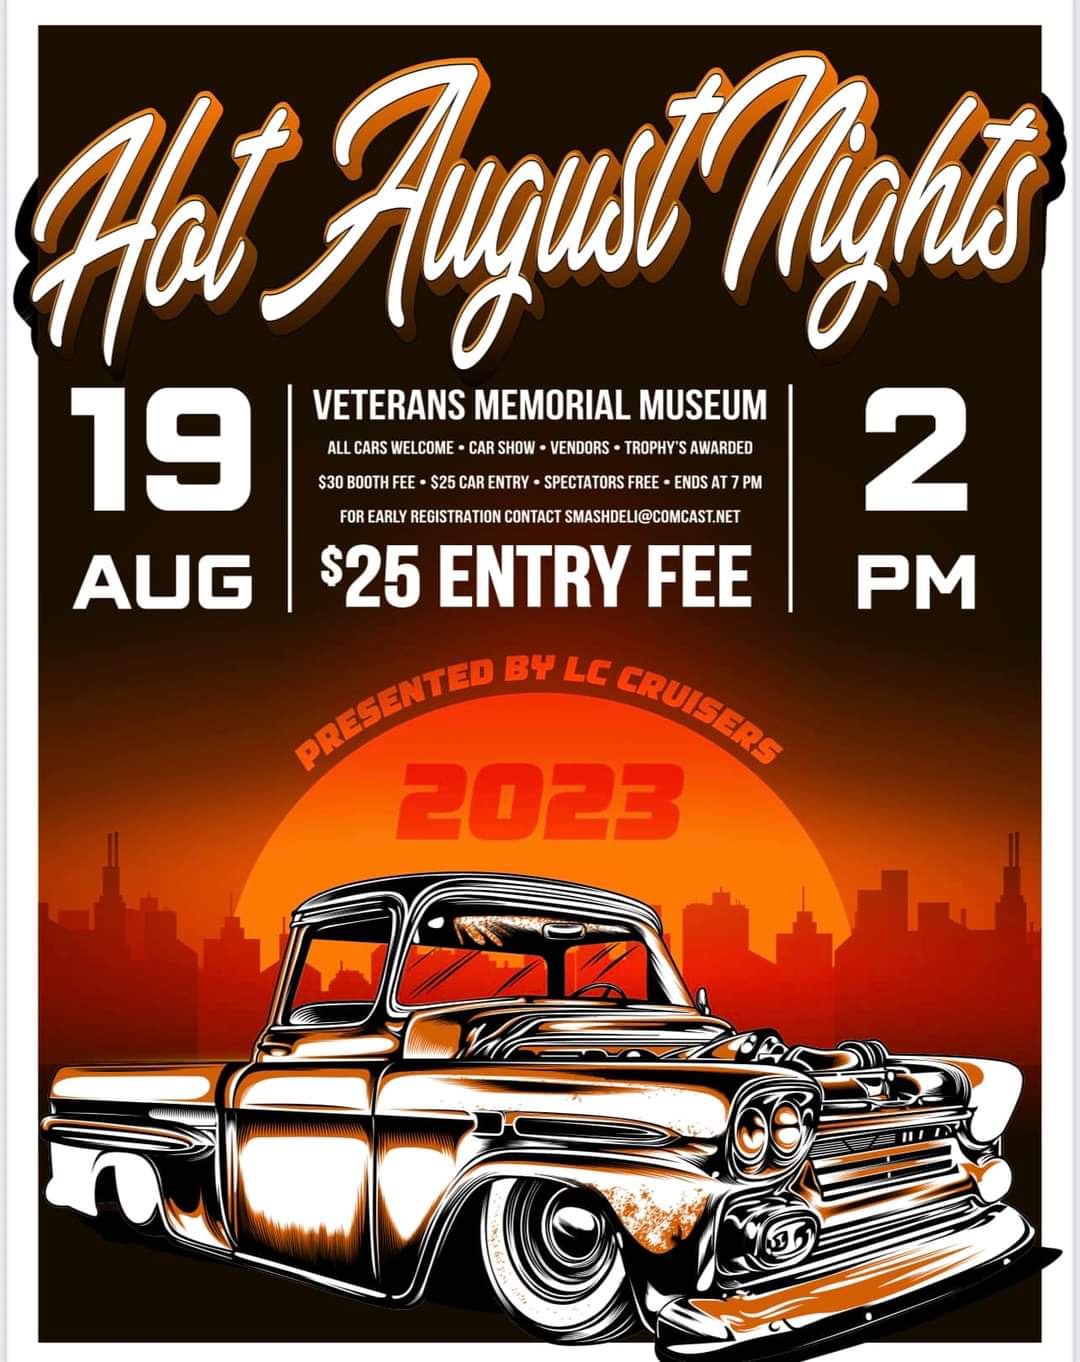 Hot August Nights Car Show